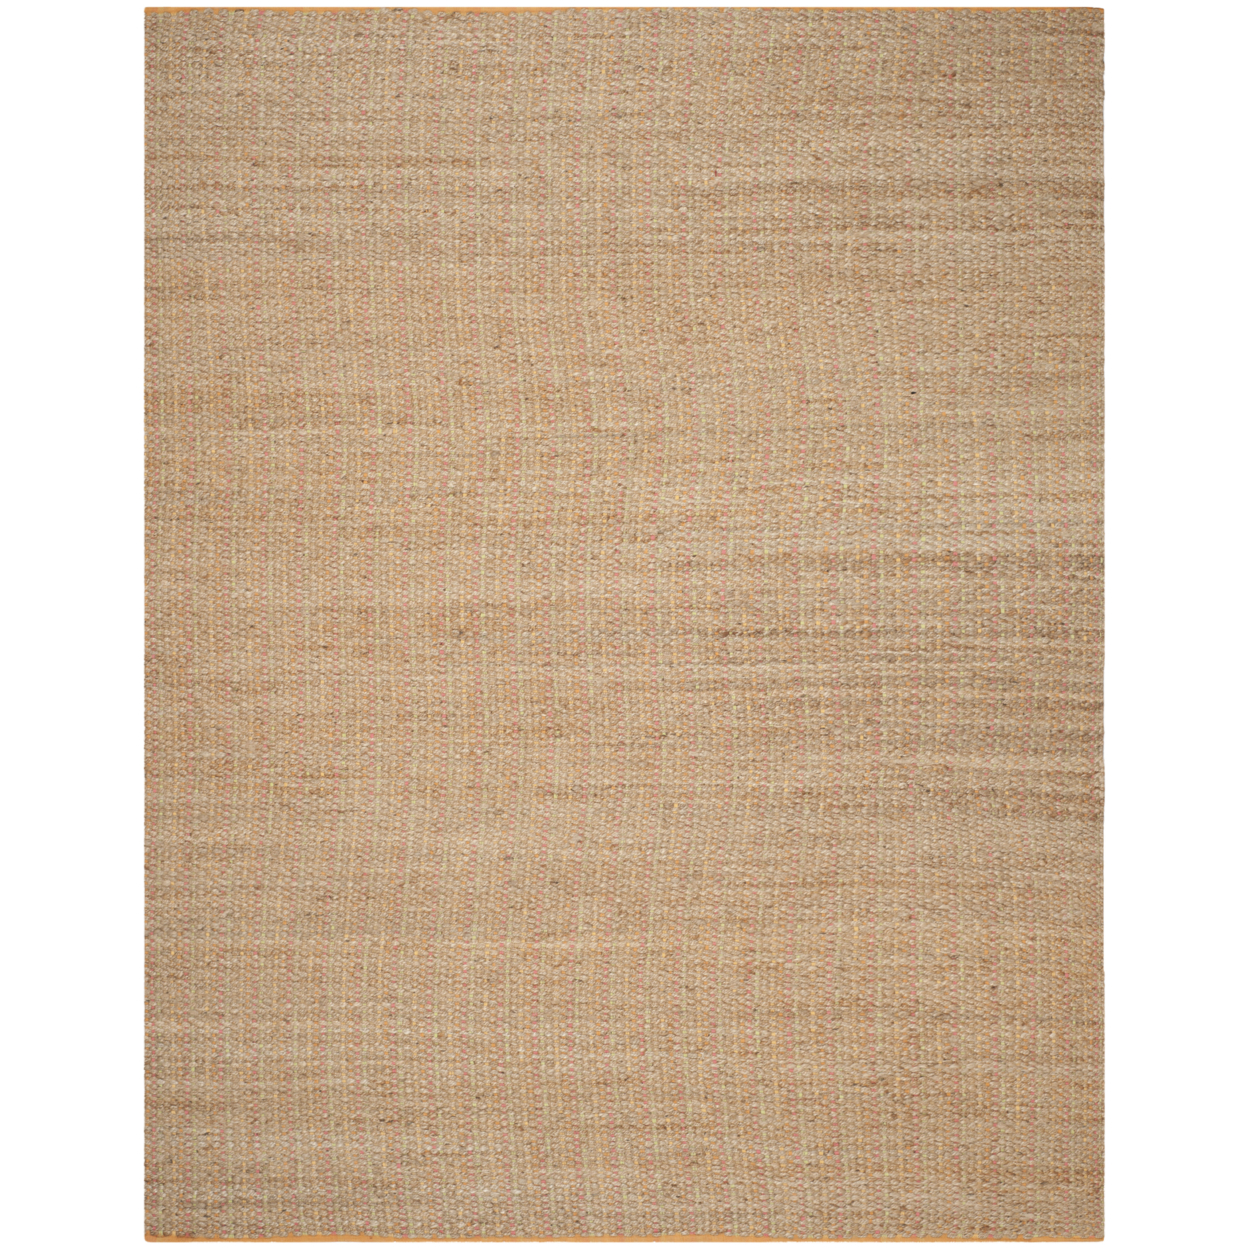 SAFAVIEH Cape Cod Collection CAP811D Handwoven Spring Rug - 6' X 9'